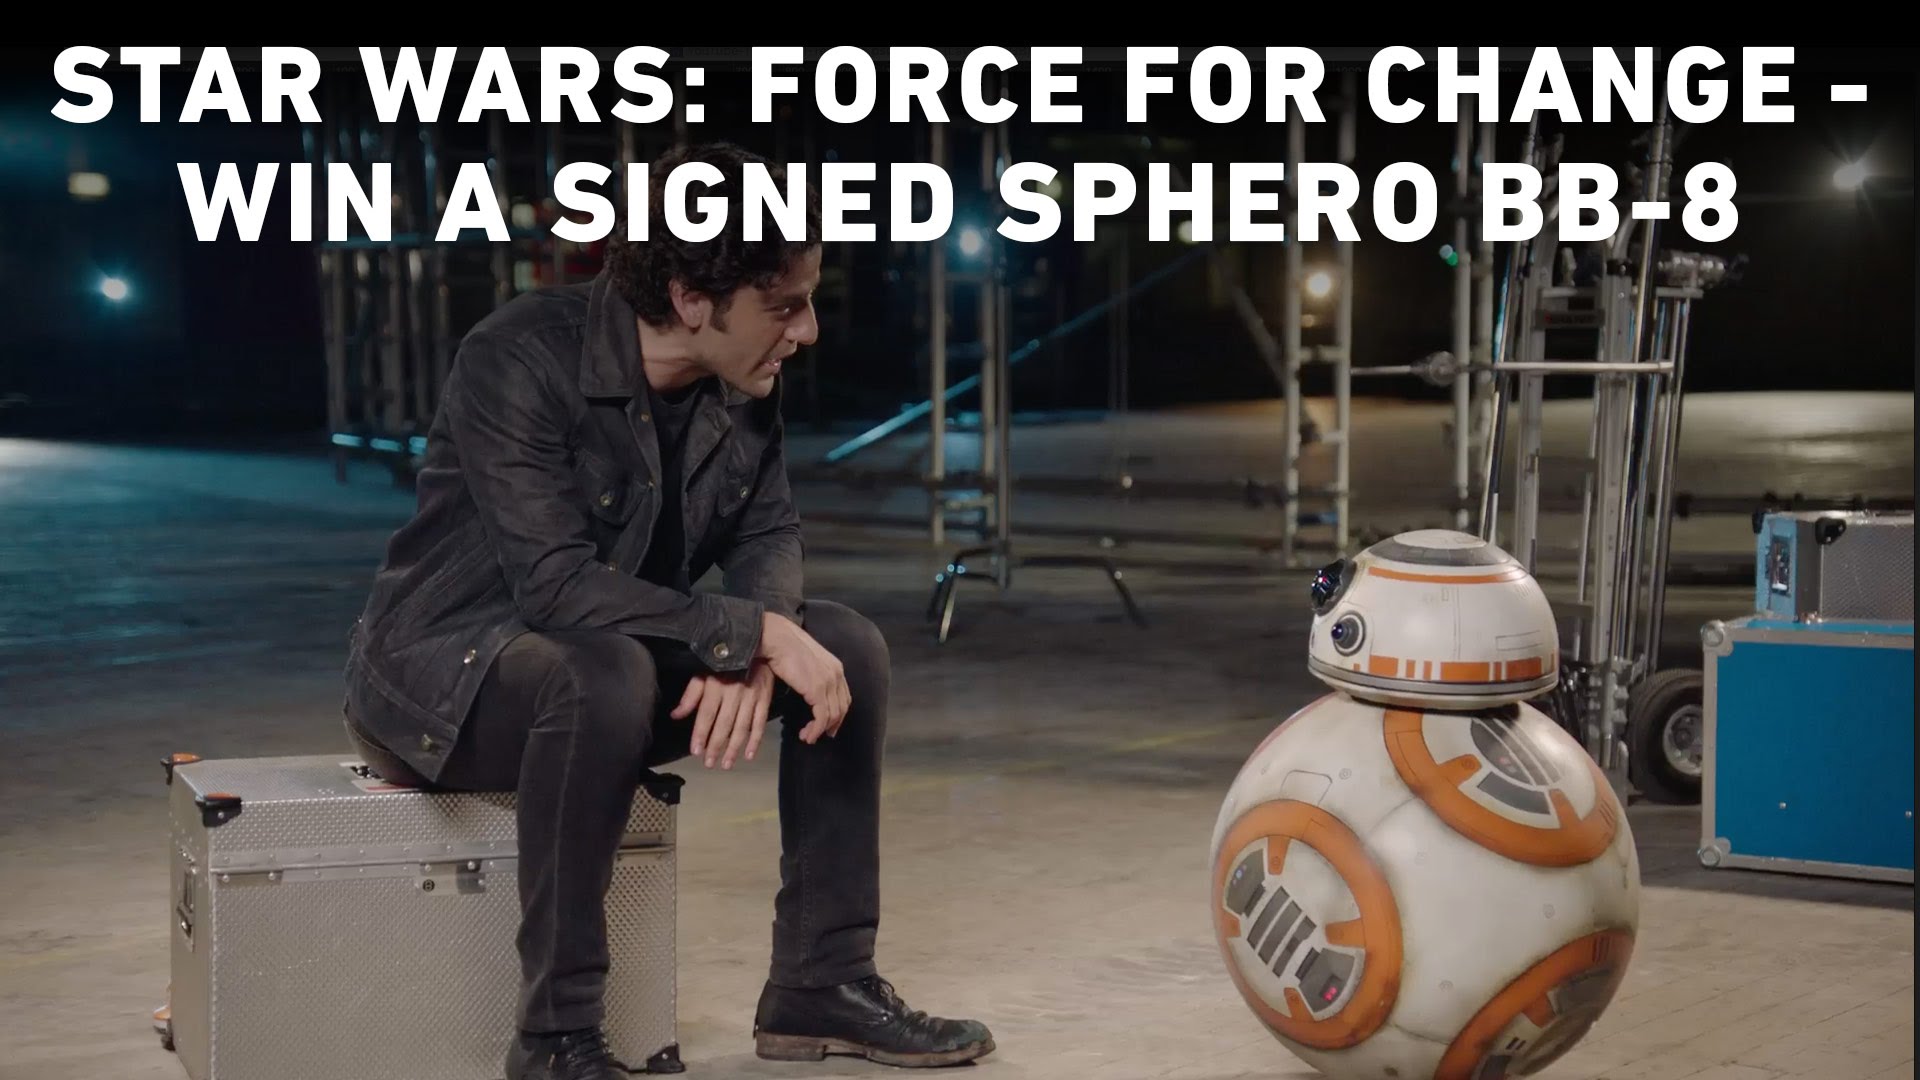 Oscar Isaac & BB-8 Share News on the Ongoing ‘Star Wars: Force for Change’ Campaign